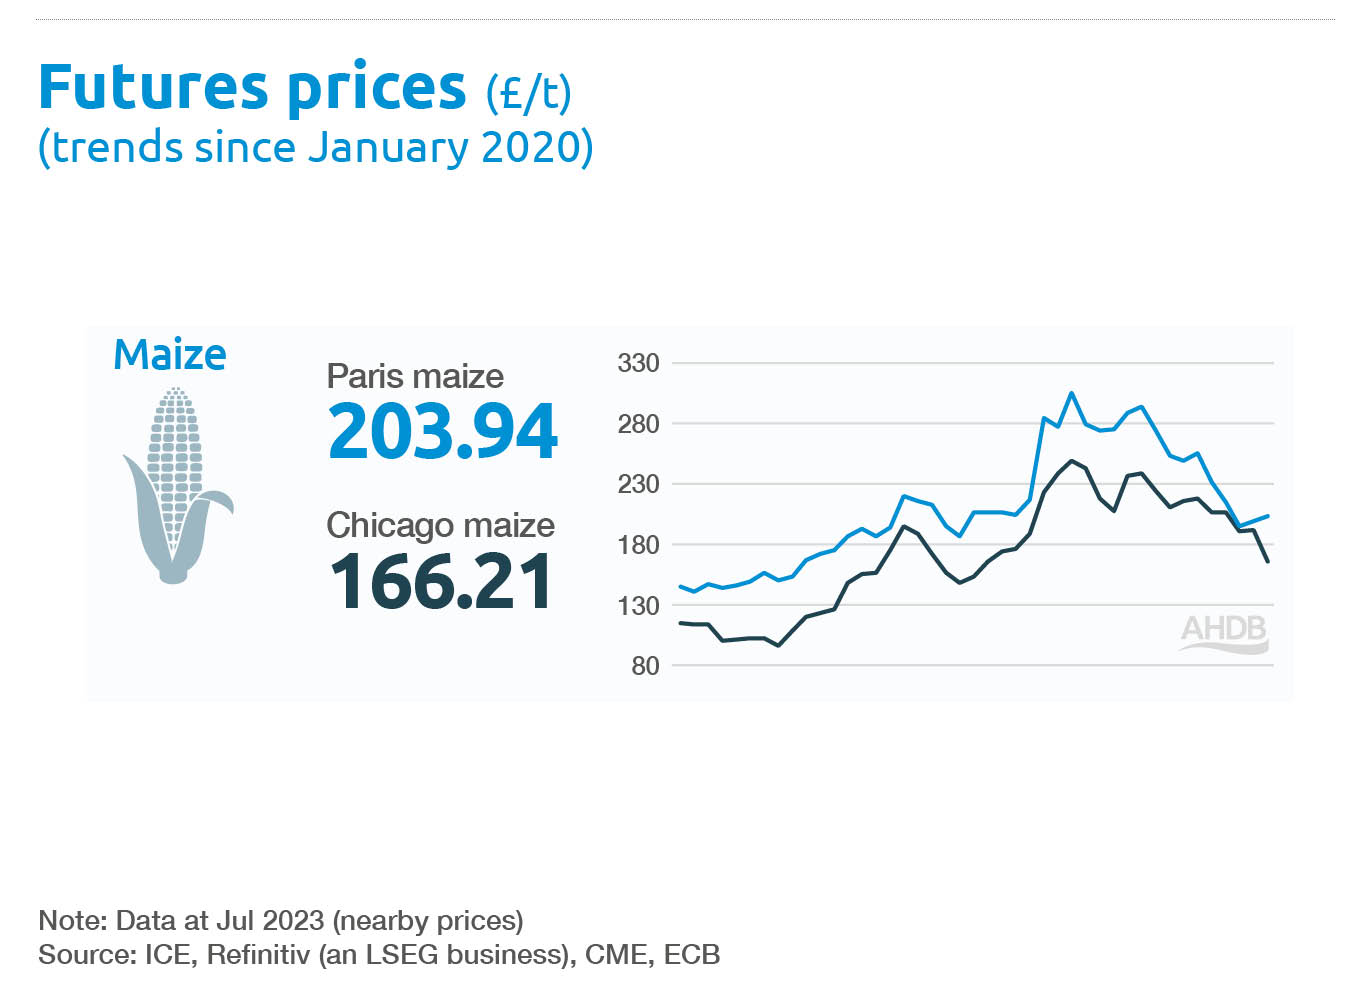 Maize futures prices